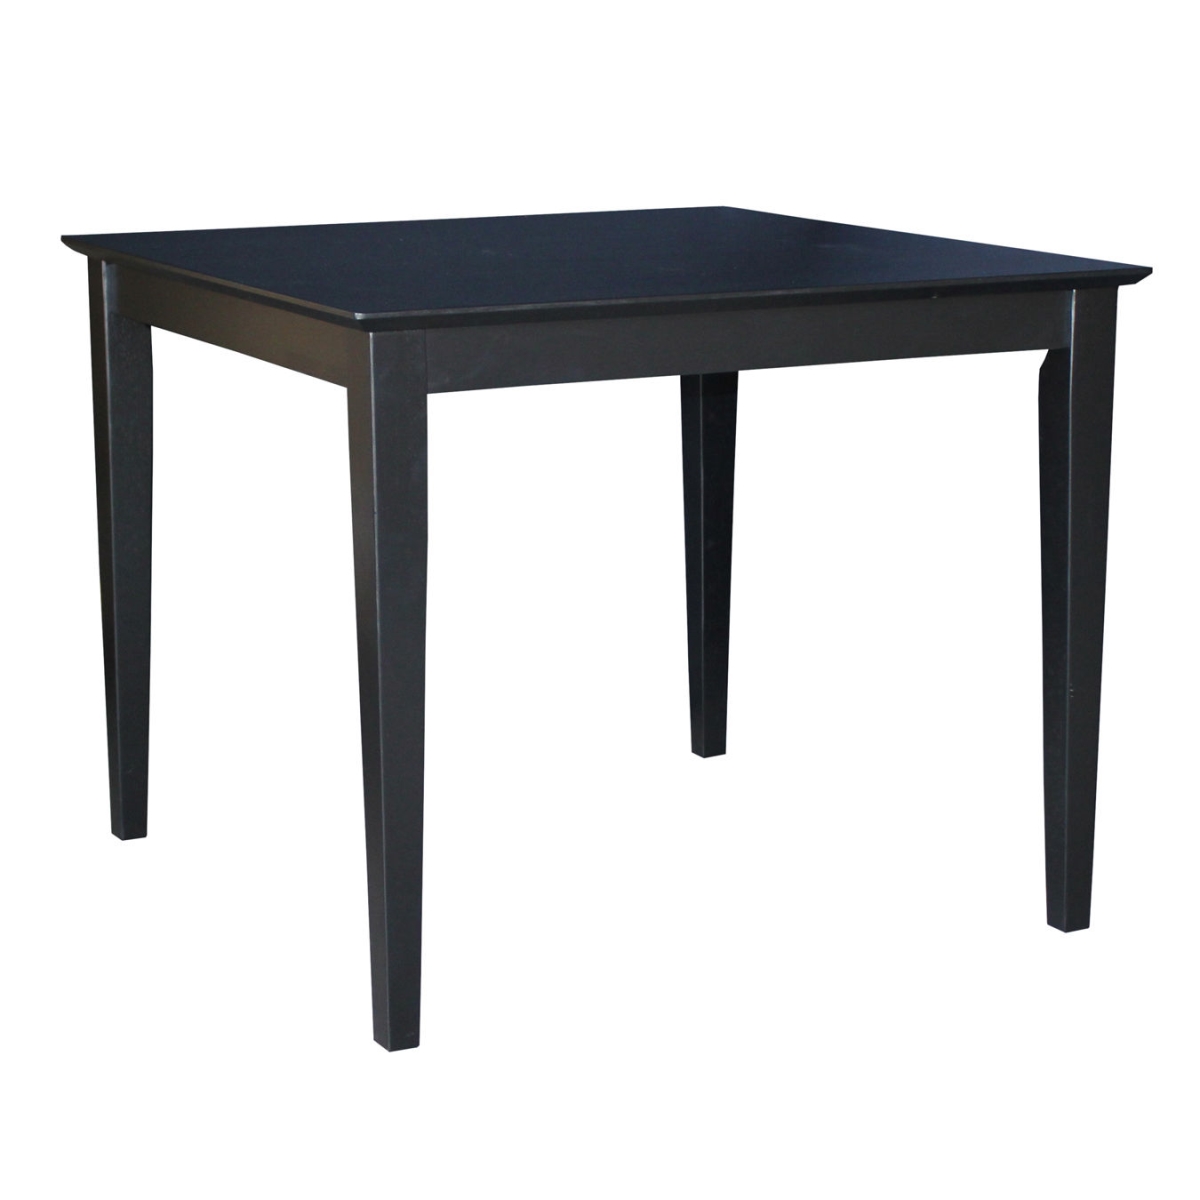 Picture of InternationalConcepts INTC668 Solid Wood Top Table - Shaker Legs, Black